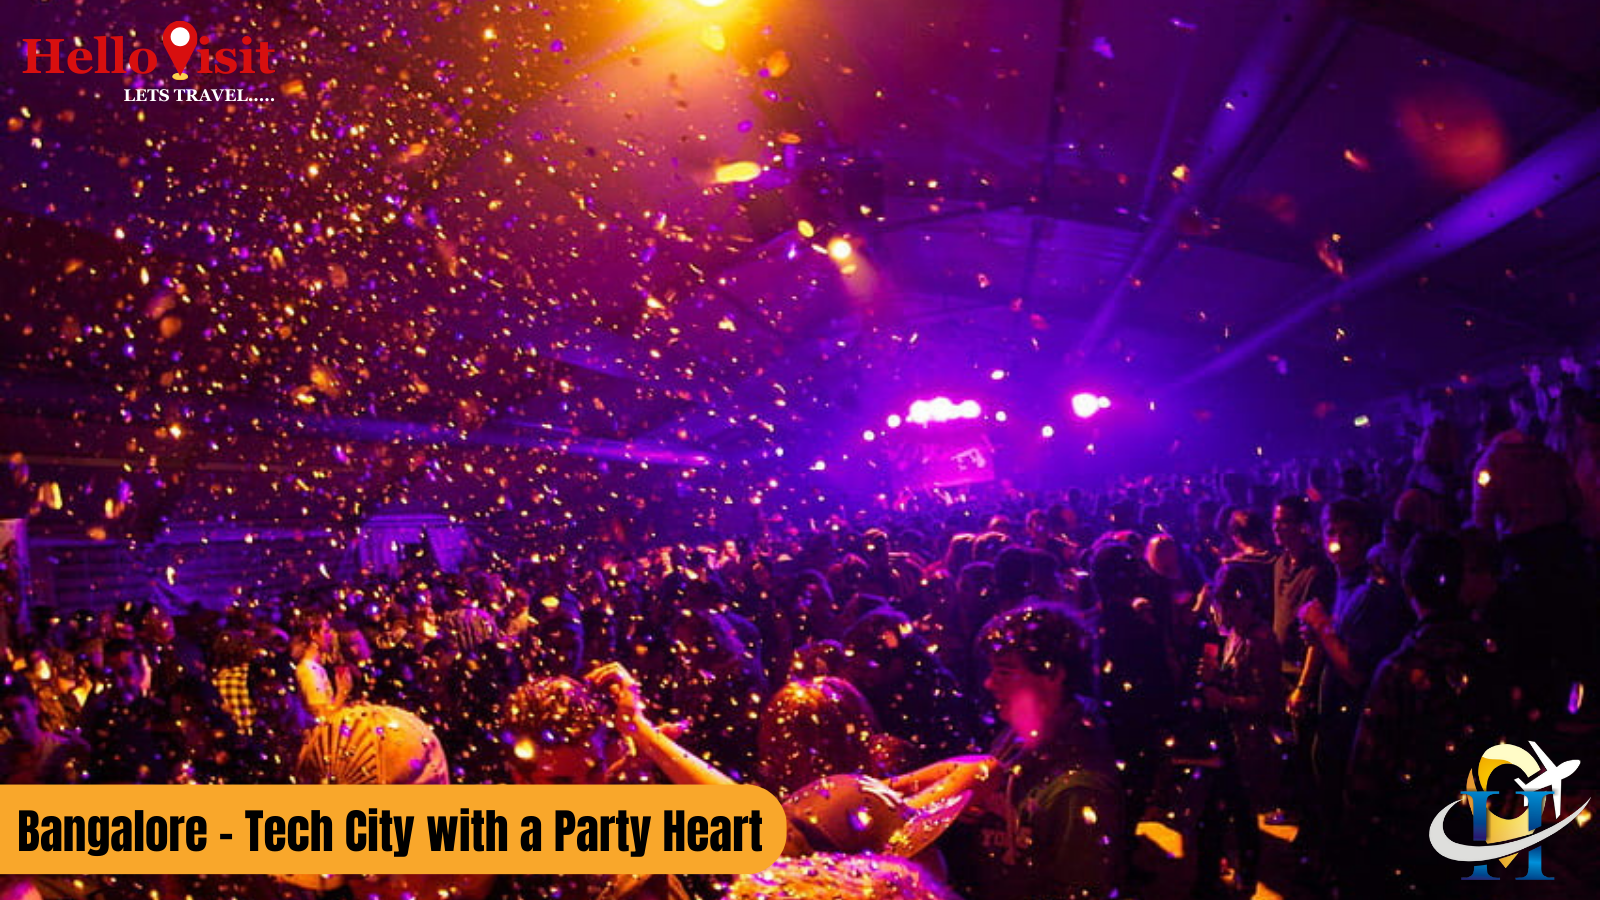 Bangalore - Tech City with a Party Heart